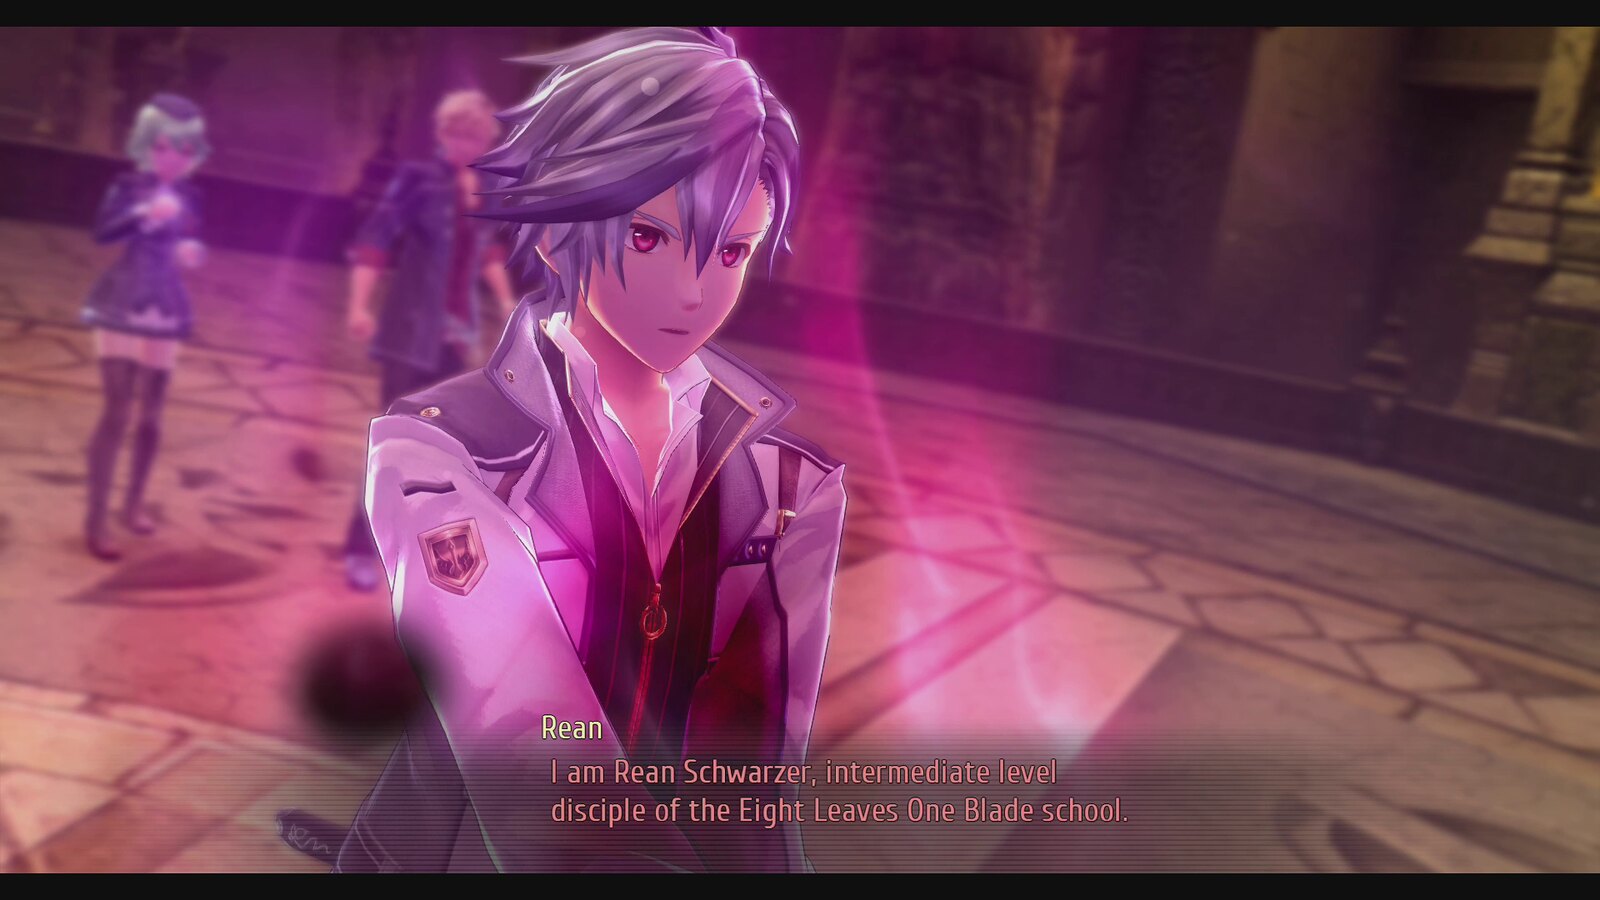 The Legend of Heroes: Trails of Cold Steel III